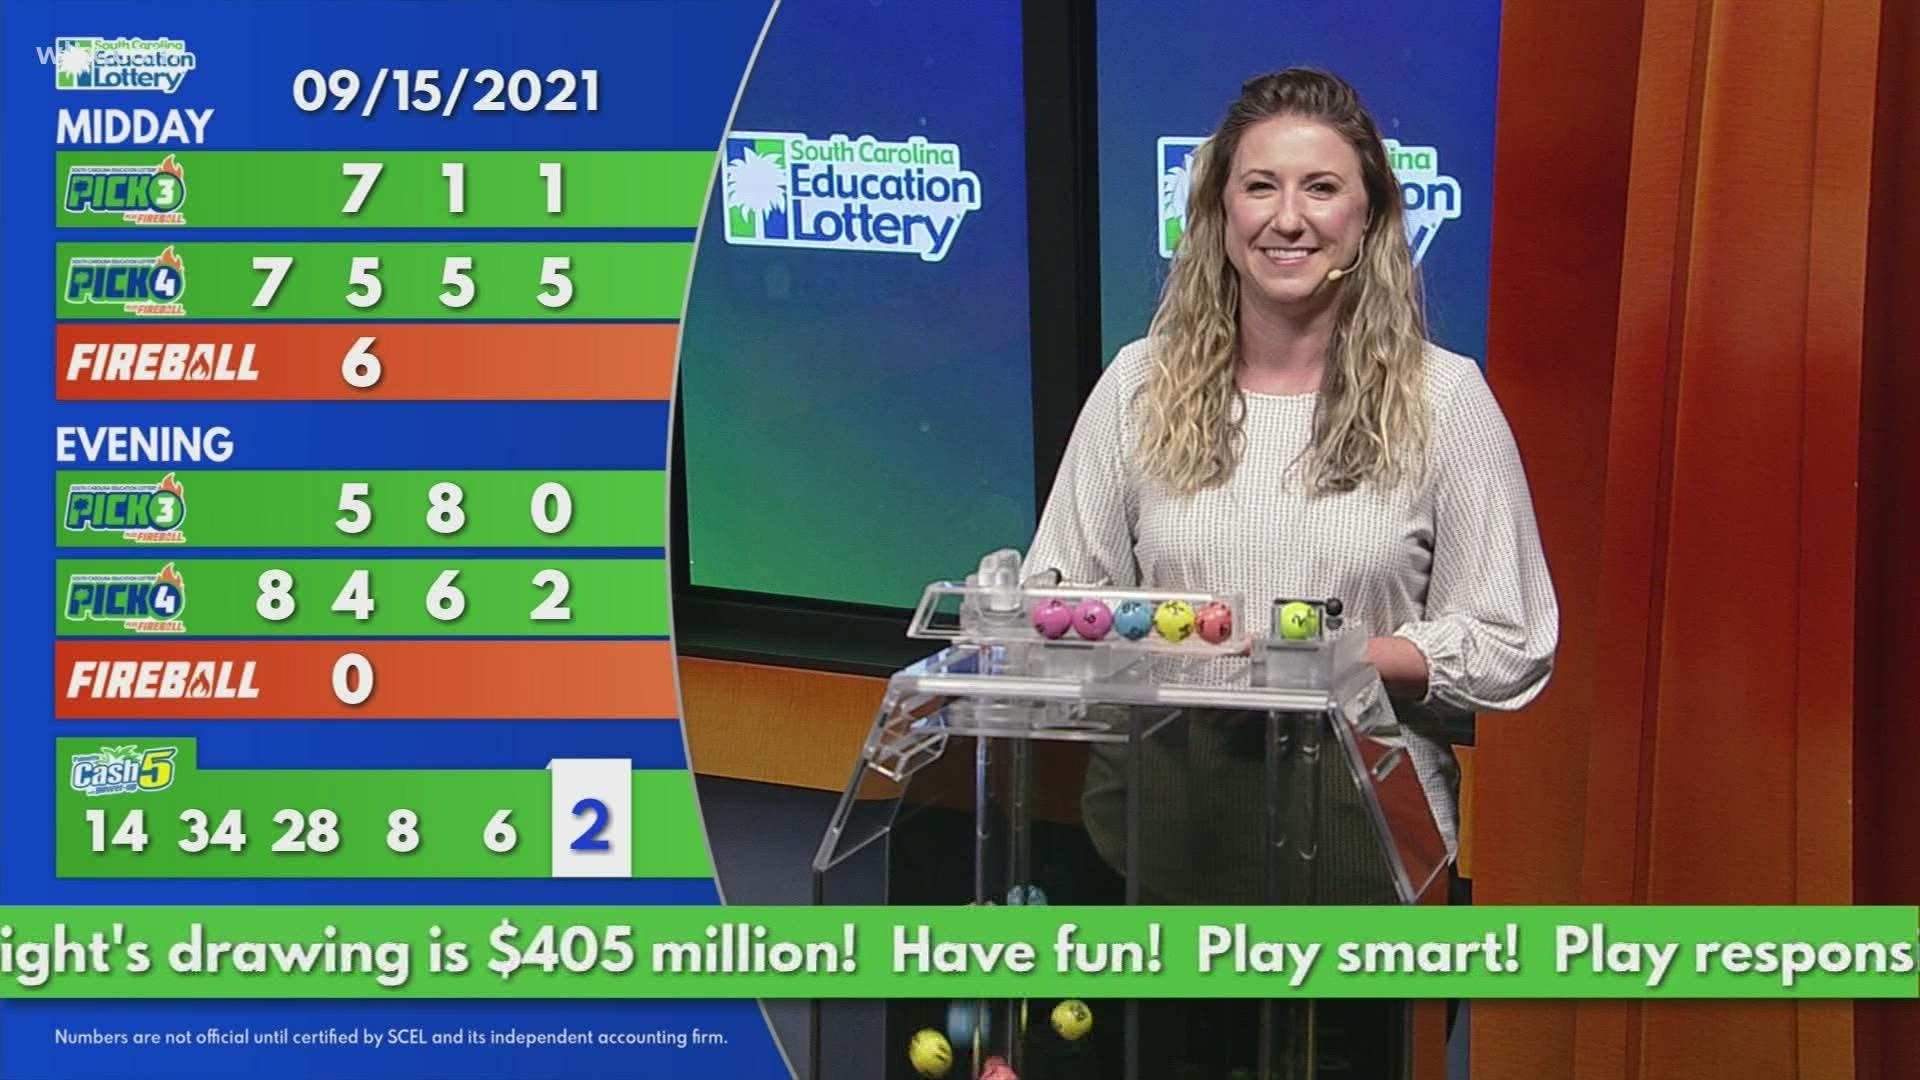 Here are the wining lottery numbers for September 15, 2021.